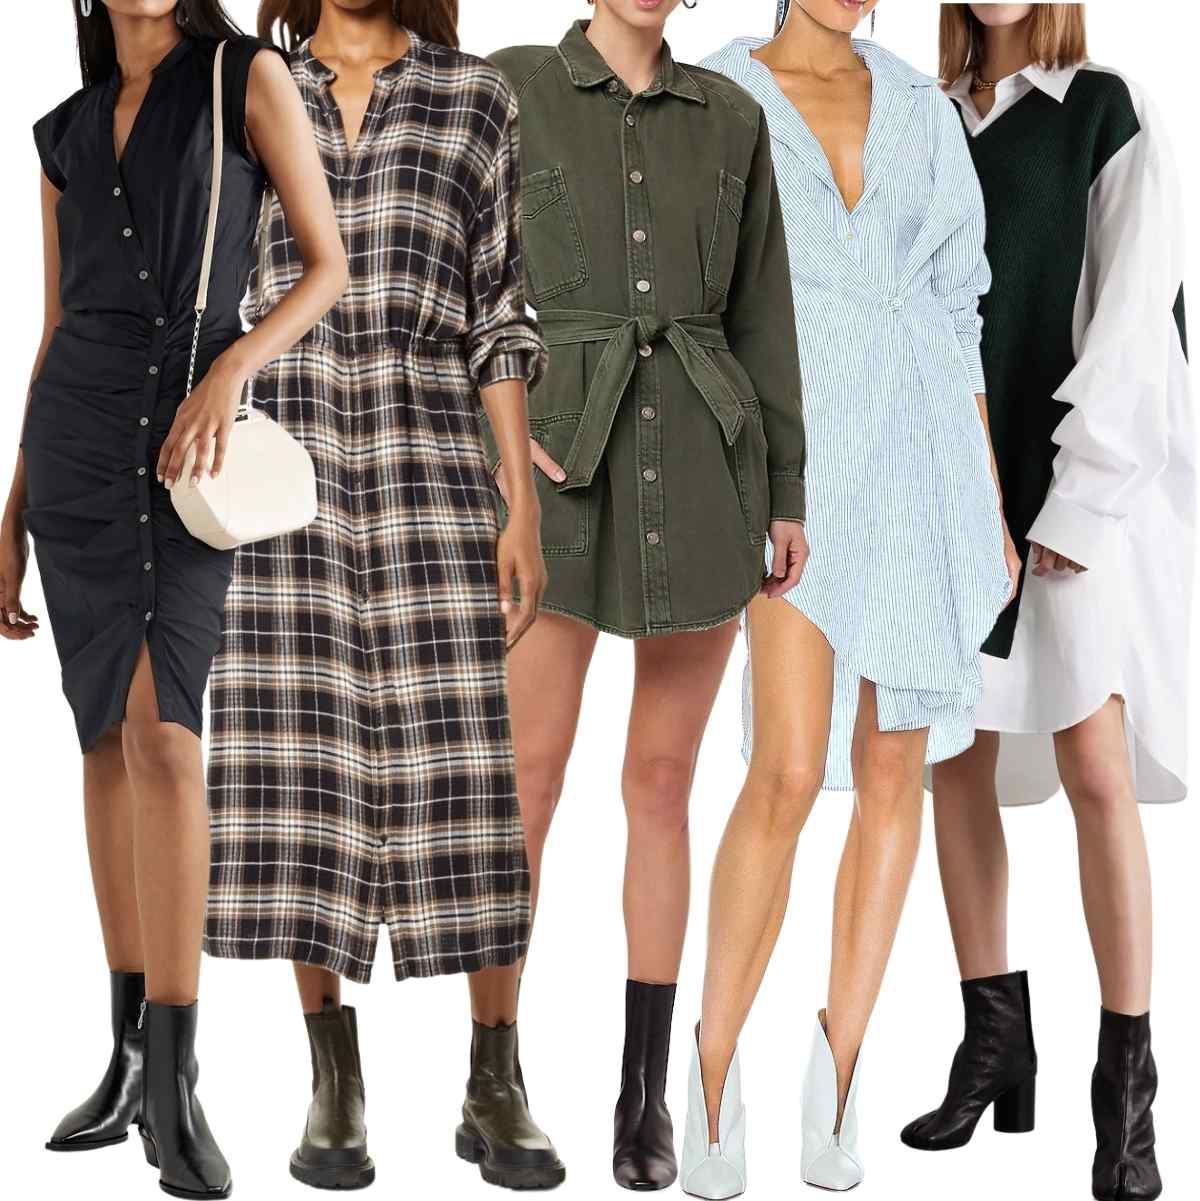 Collage of 5 women wearing different shirt dresses with ankle boots.